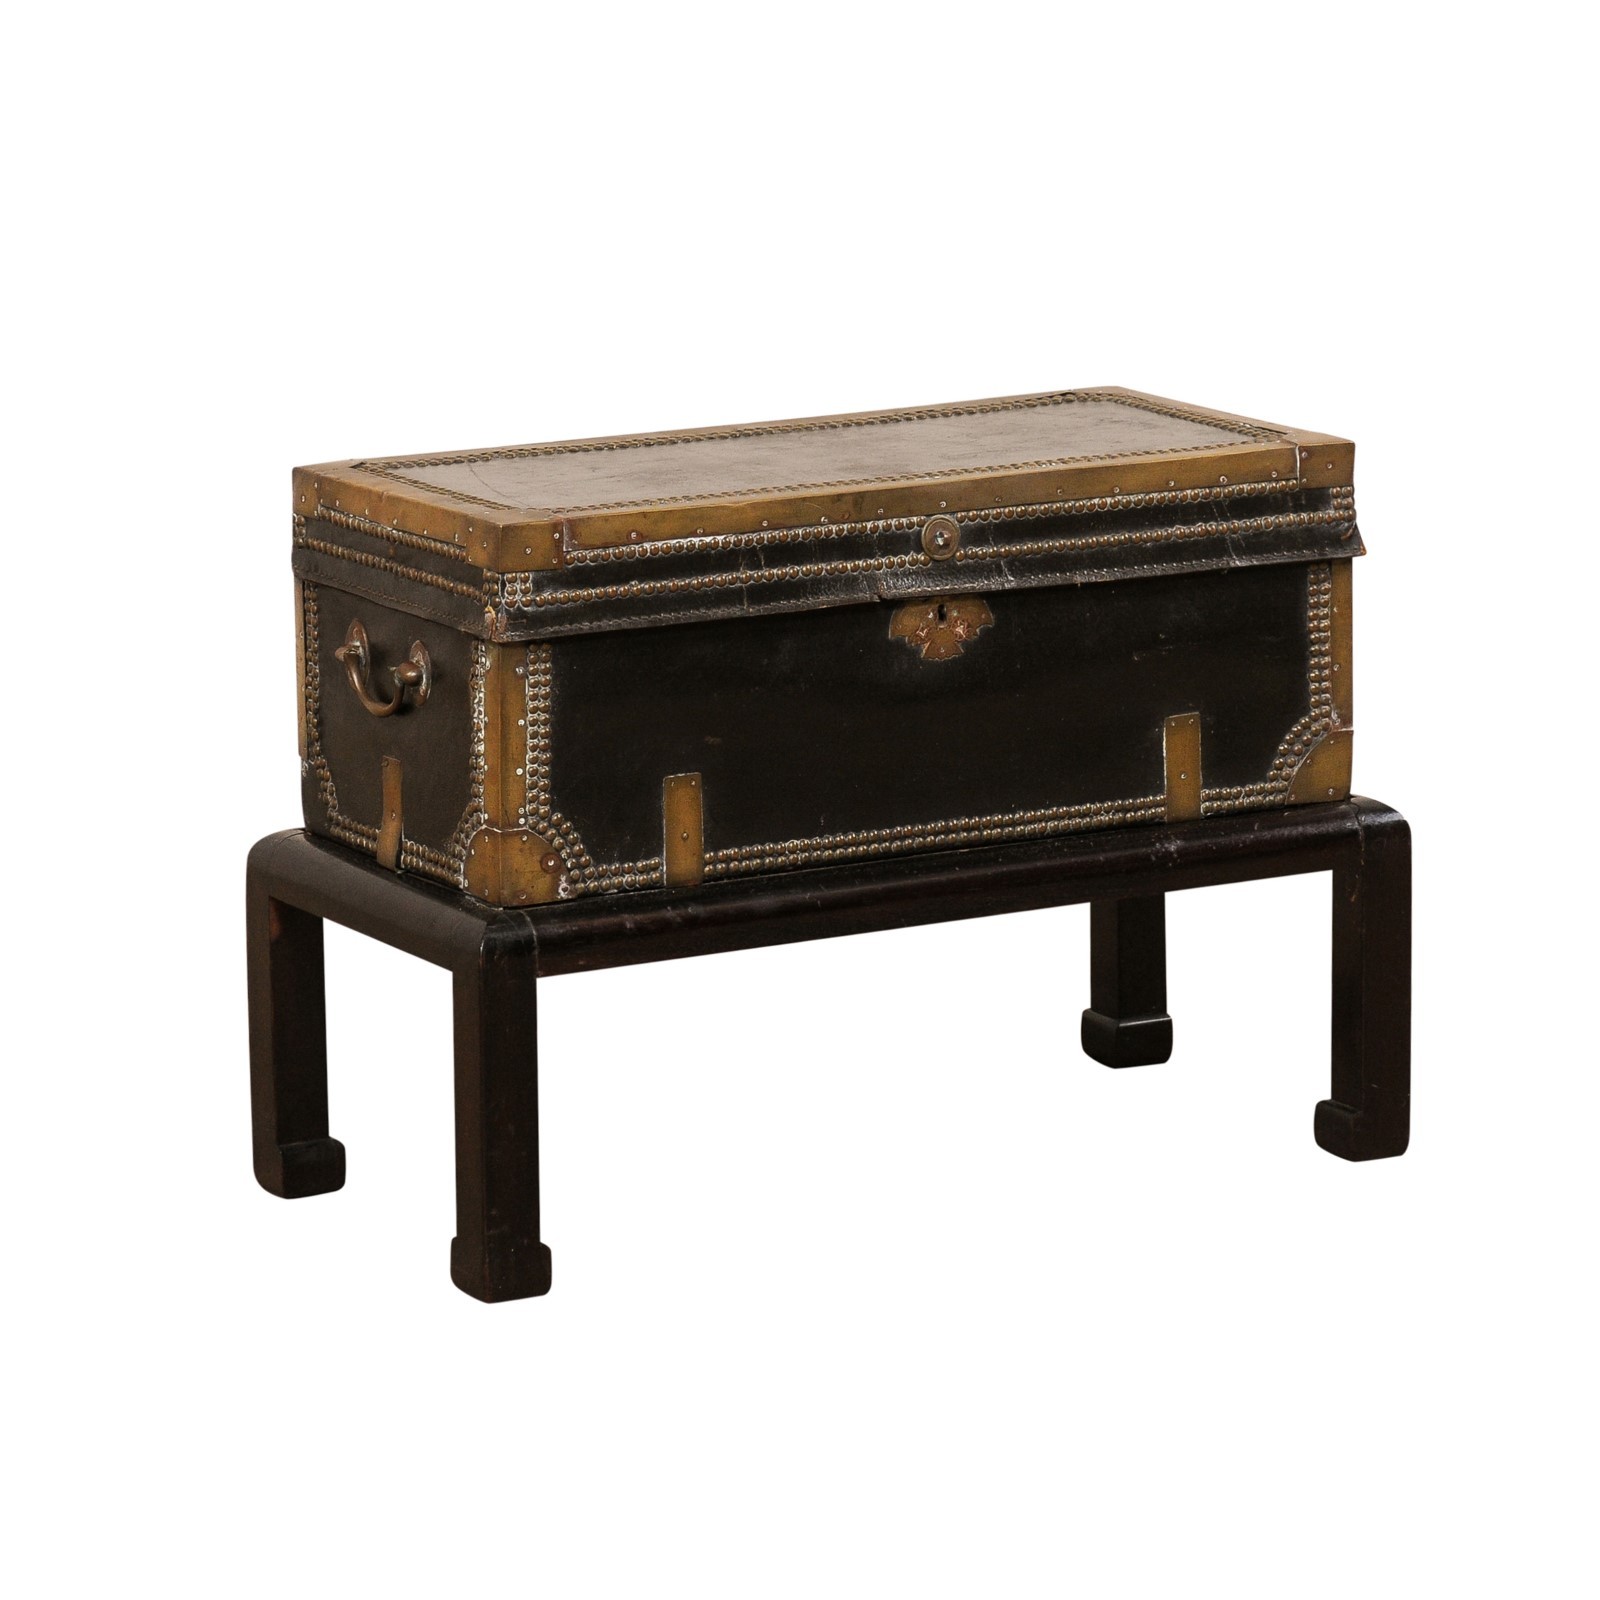 Chinese 19th C. Raised Trunk (Drinks Table)